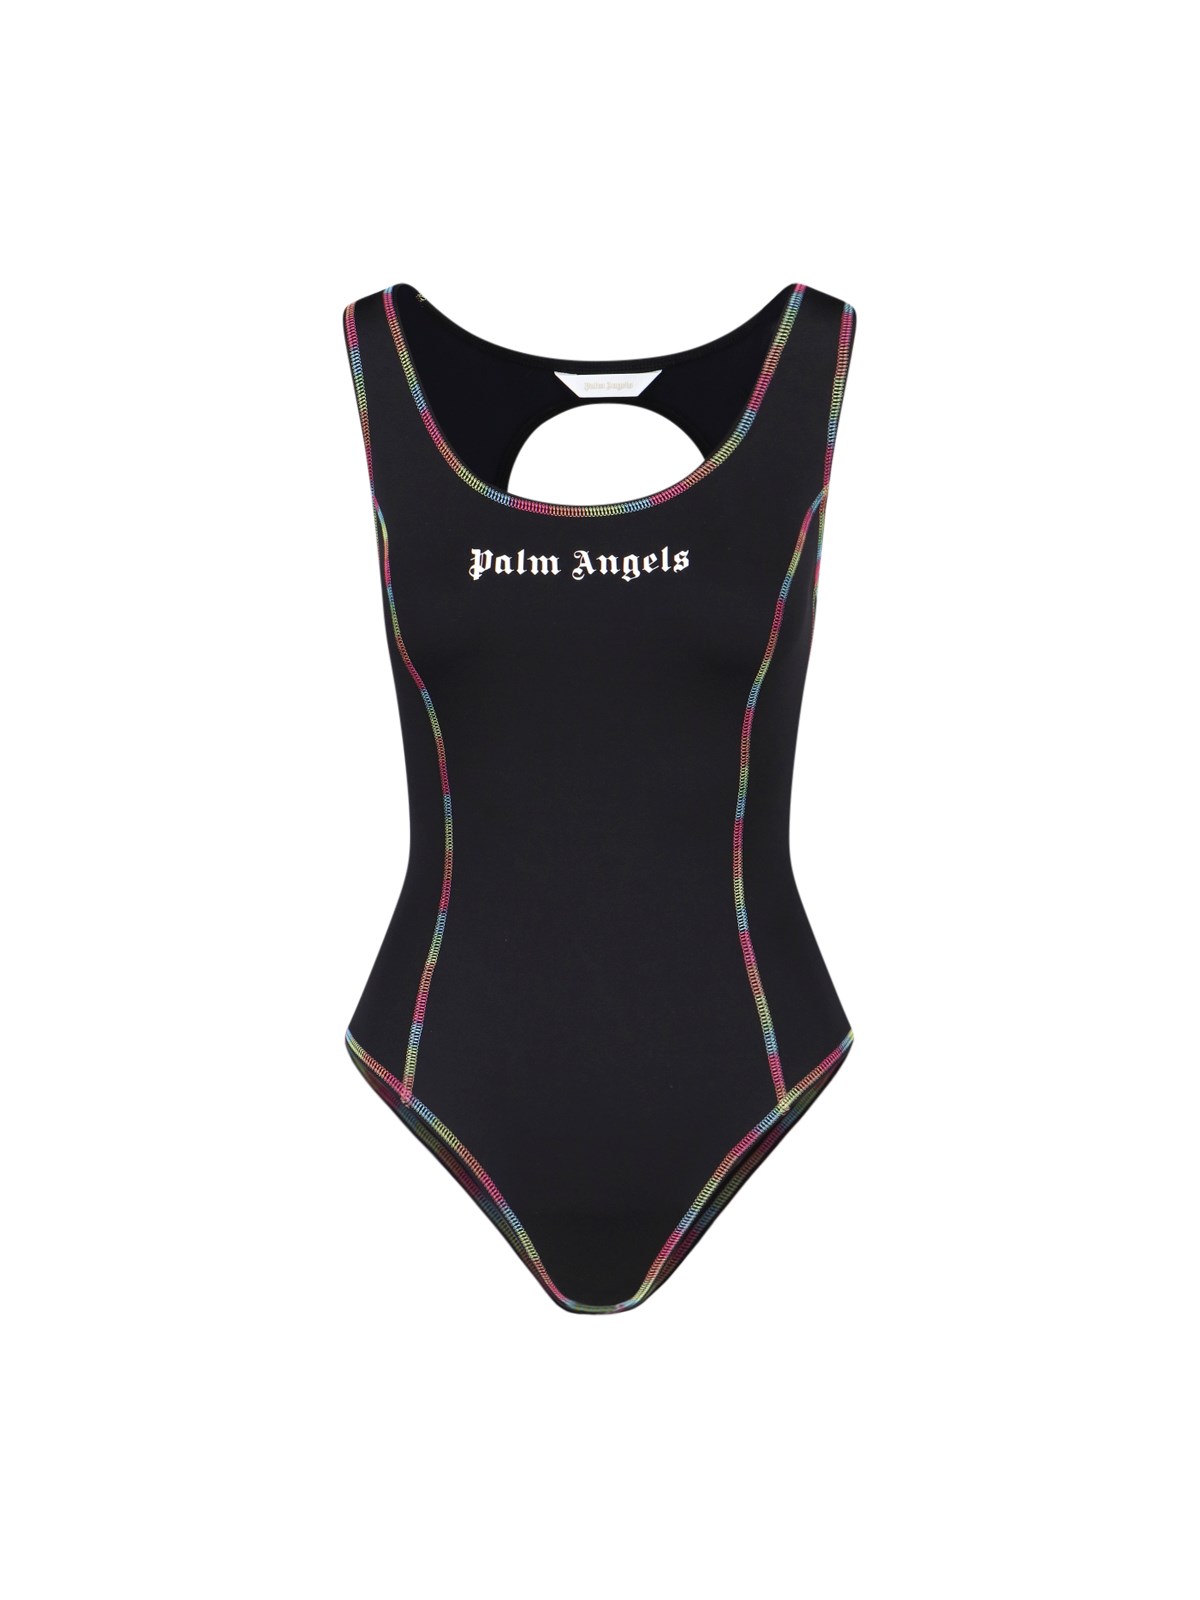 PALM ANGELS 'SURF' ONE-PIECE SWIMSUIT